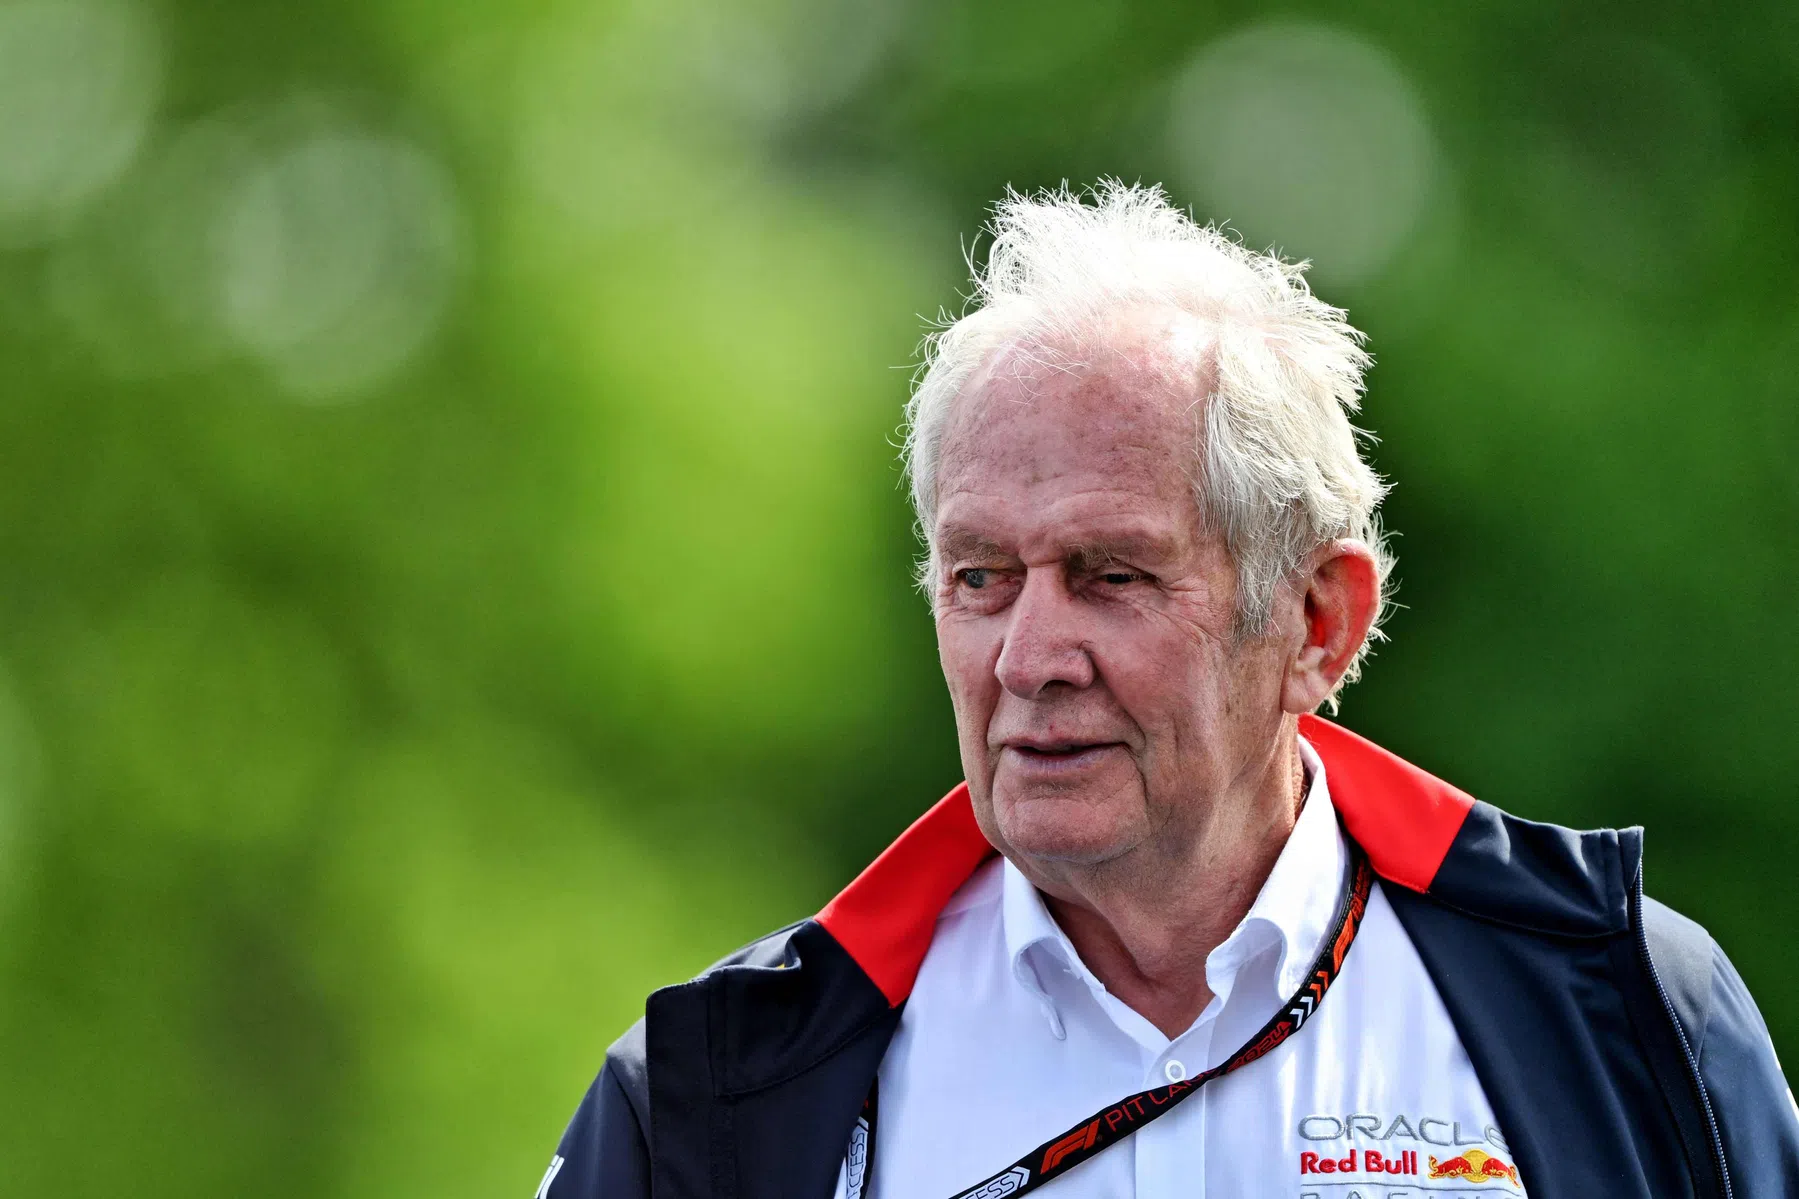 Marko dissatisfied with the FIA after Austria GP